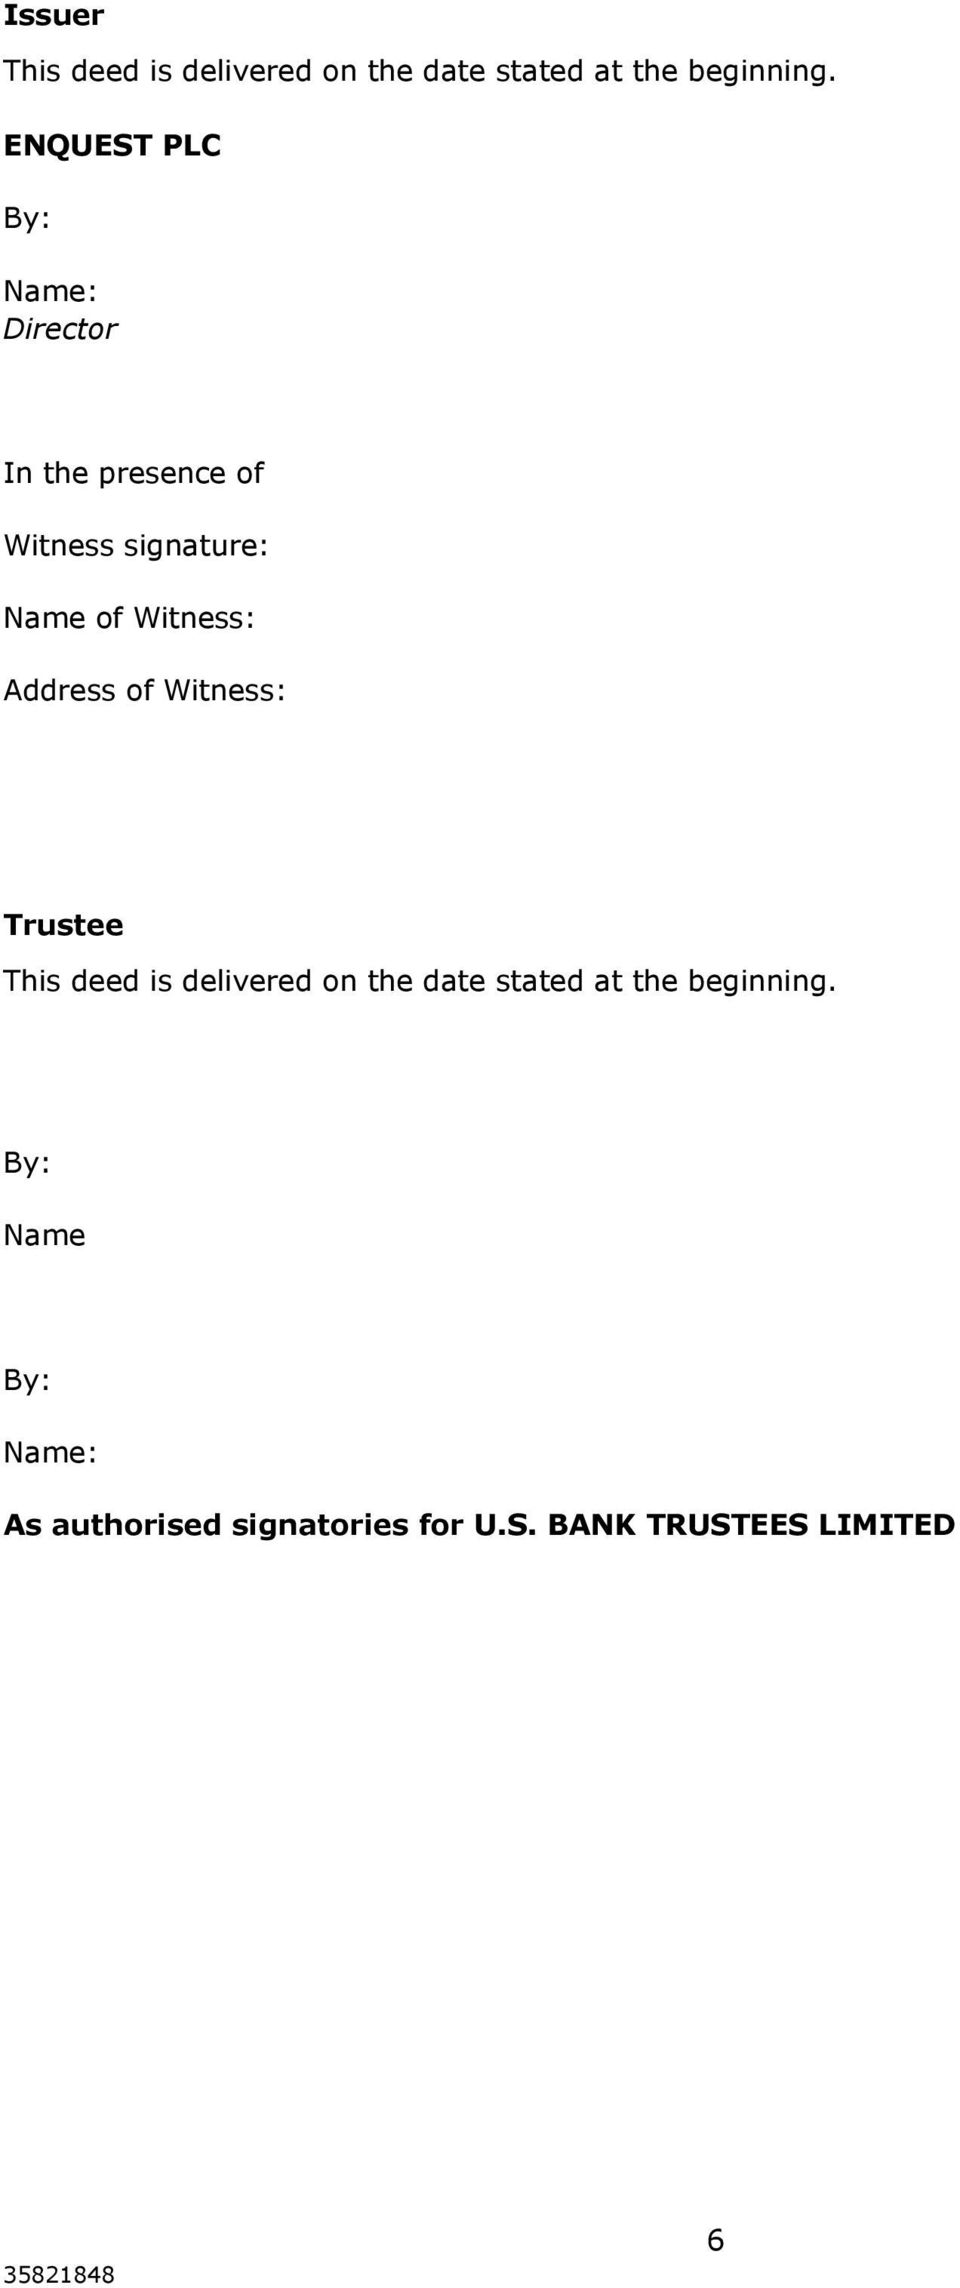 ENQUEST PLC Trustee This deed is delivered on the date